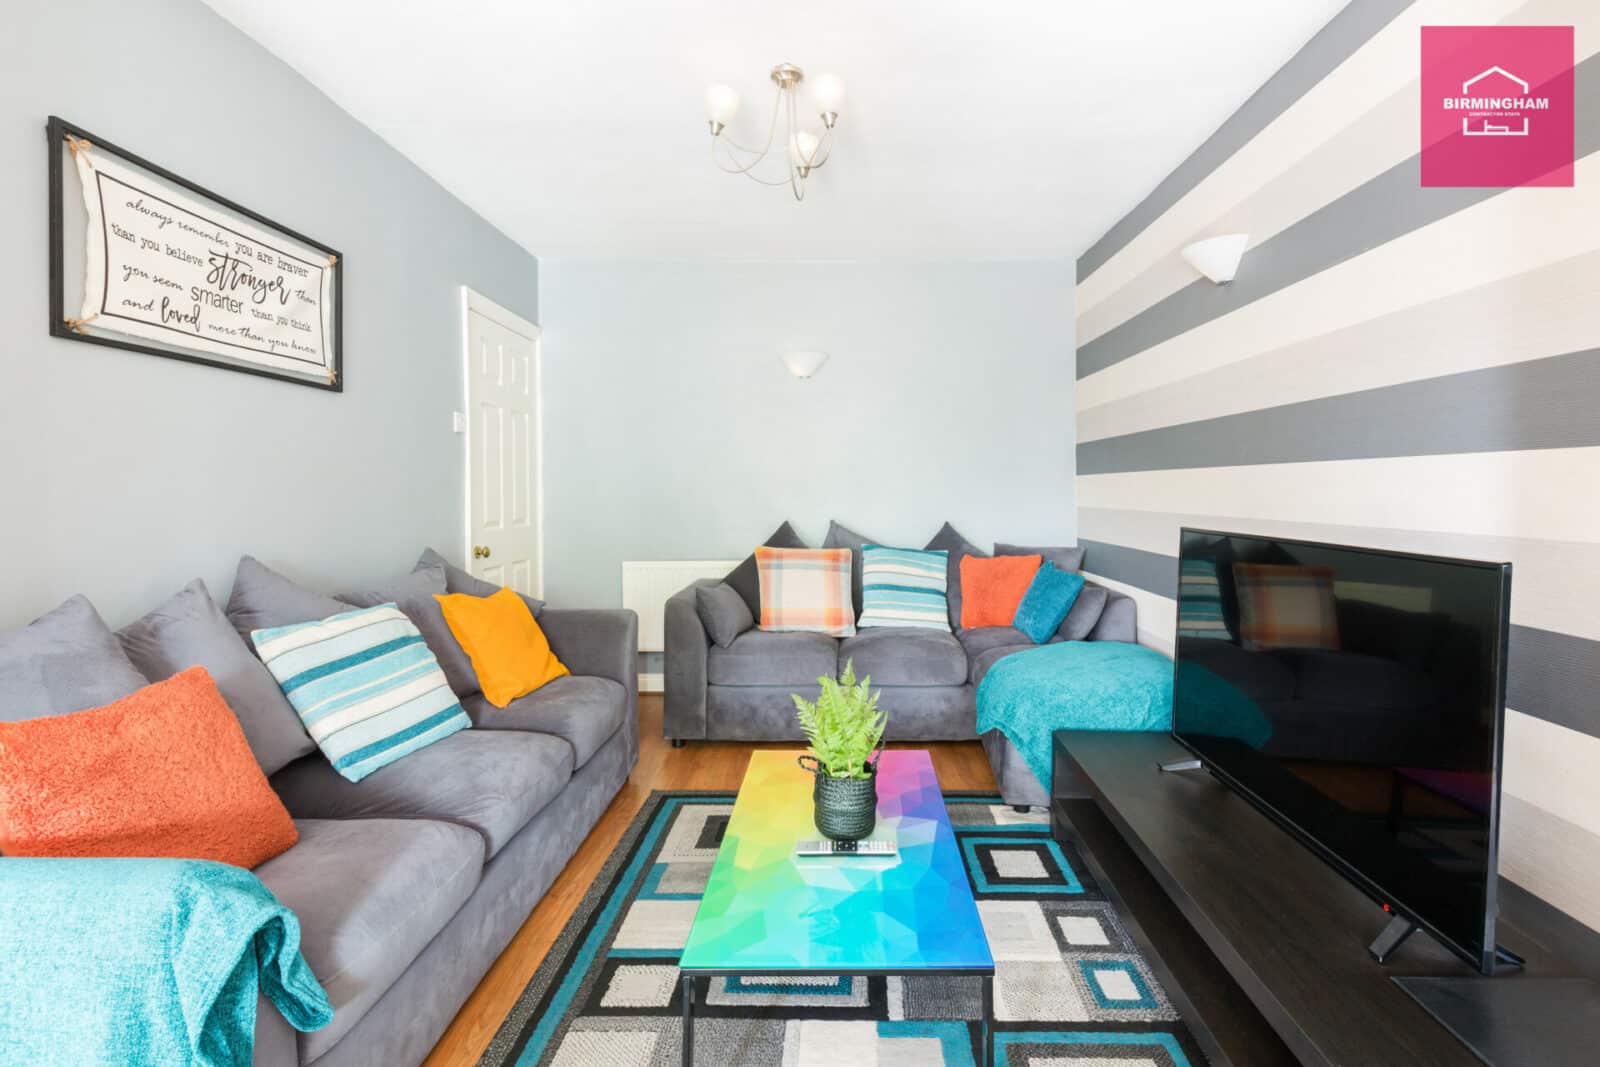 Vibrantly decorated living room with comfortable sofas, colorful pillows, and a modern coffee table. A large TV is mounted on the wall. This inviting space is a contractor house for rent in Birmingham, featuring 4 bedrooms that can accommodate up to 7 guests